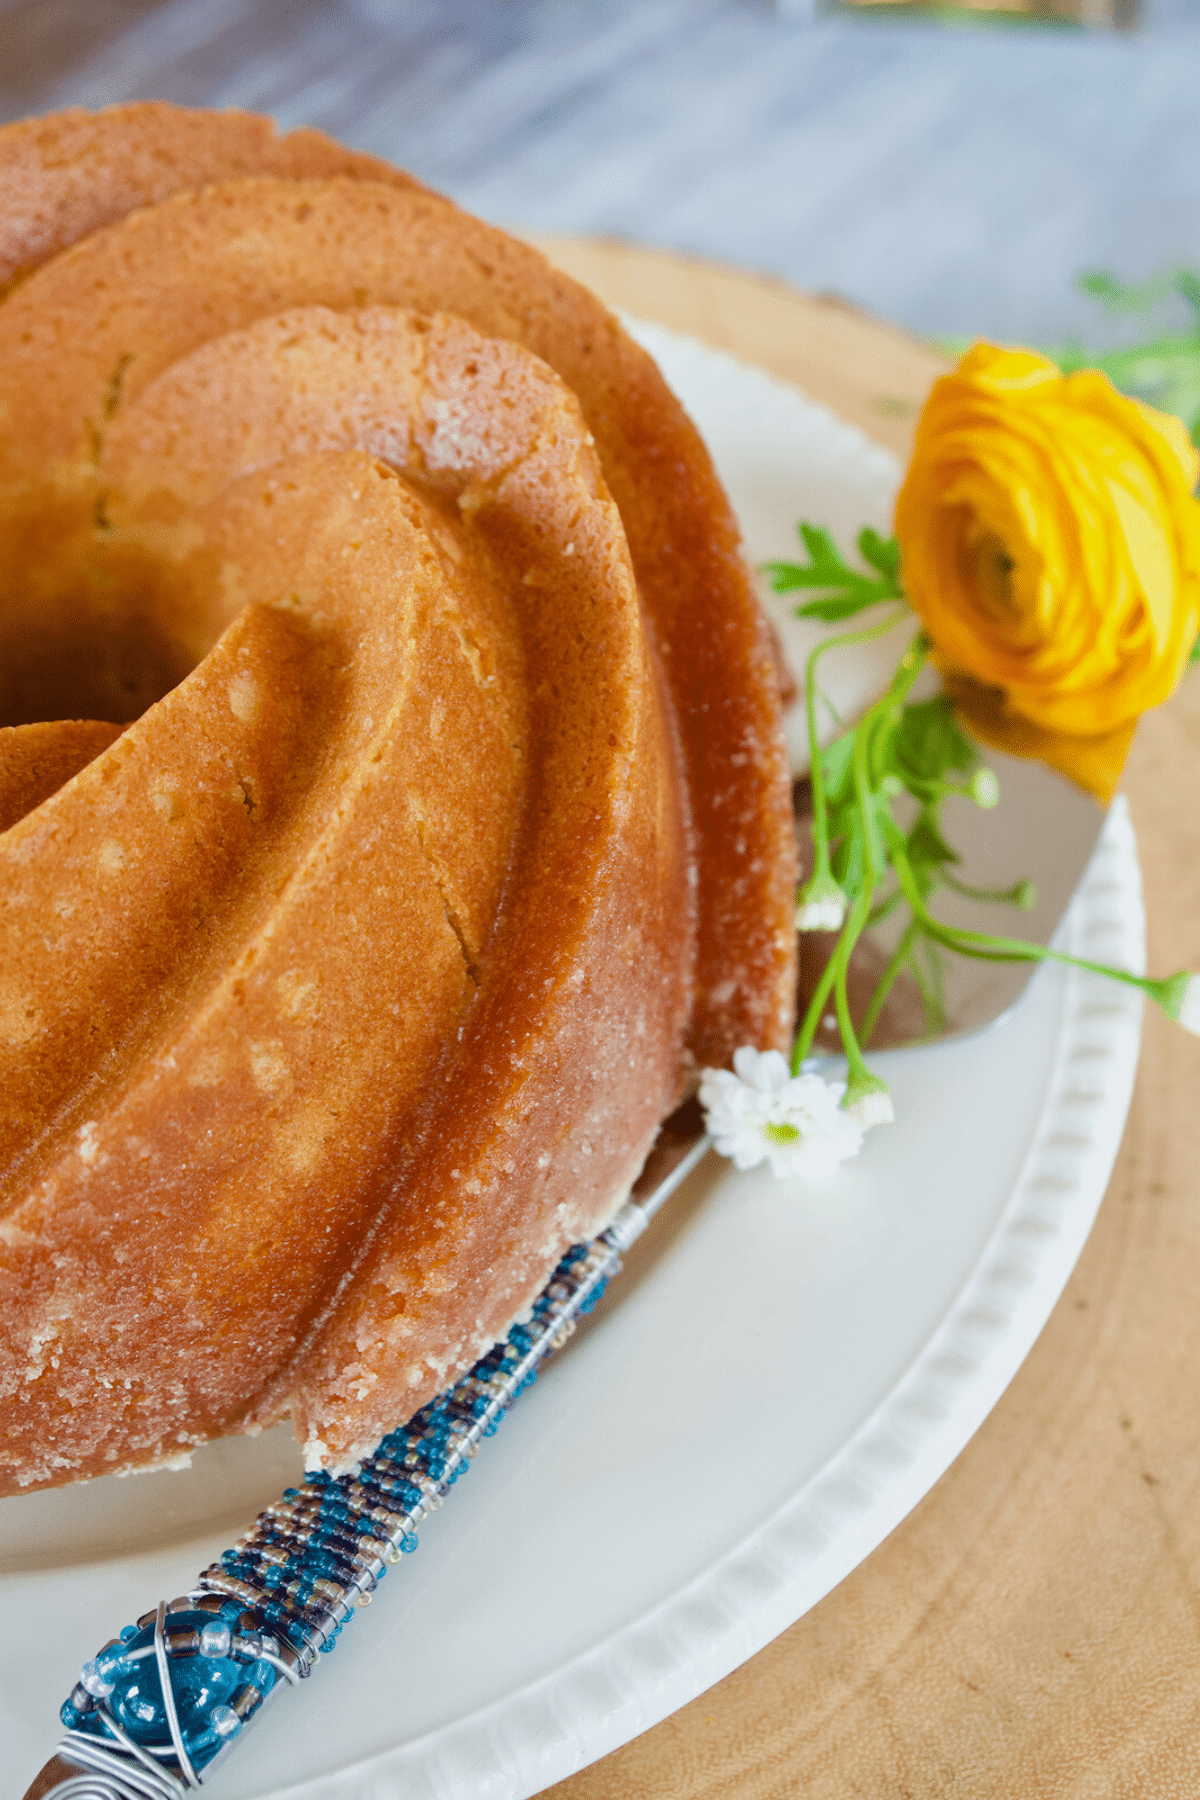 Old fashioned butter pound cake on platter with flower and serving utensil.